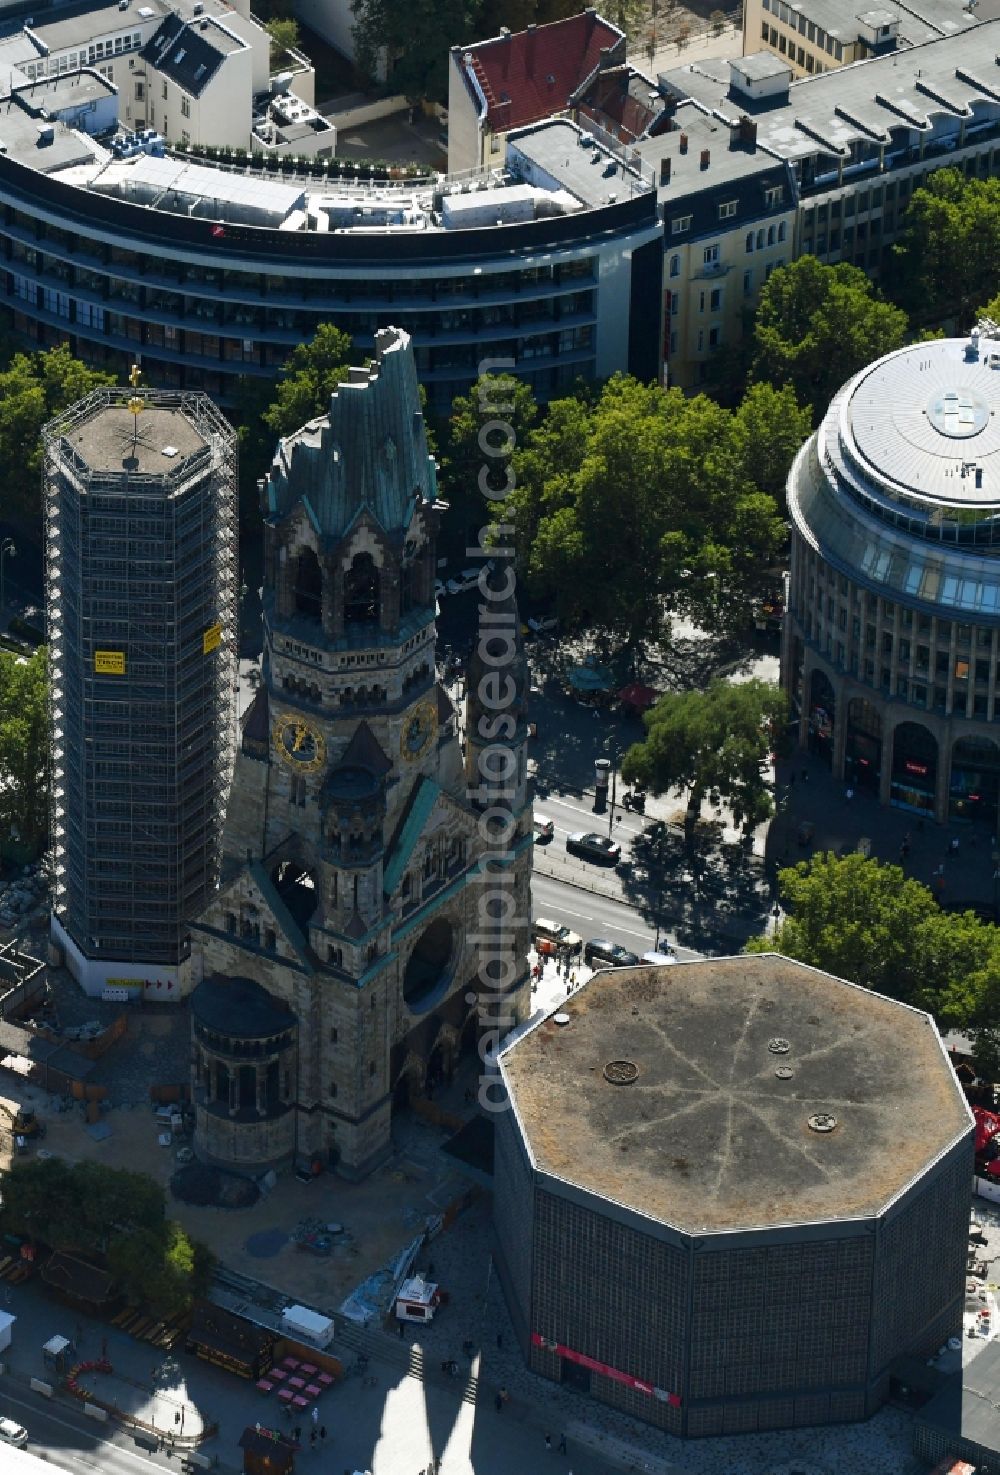 Aerial image Berlin - The Protestant Kaiser William Memorial Church (colloquially known Memorial Church and in Berlin dialect called Hollow Tooth) is located at Breitscheidplatz between the Kurfuerstendamm, the Tauentzienstrasse and the Budapest street in Berlin's Charlottenburg district